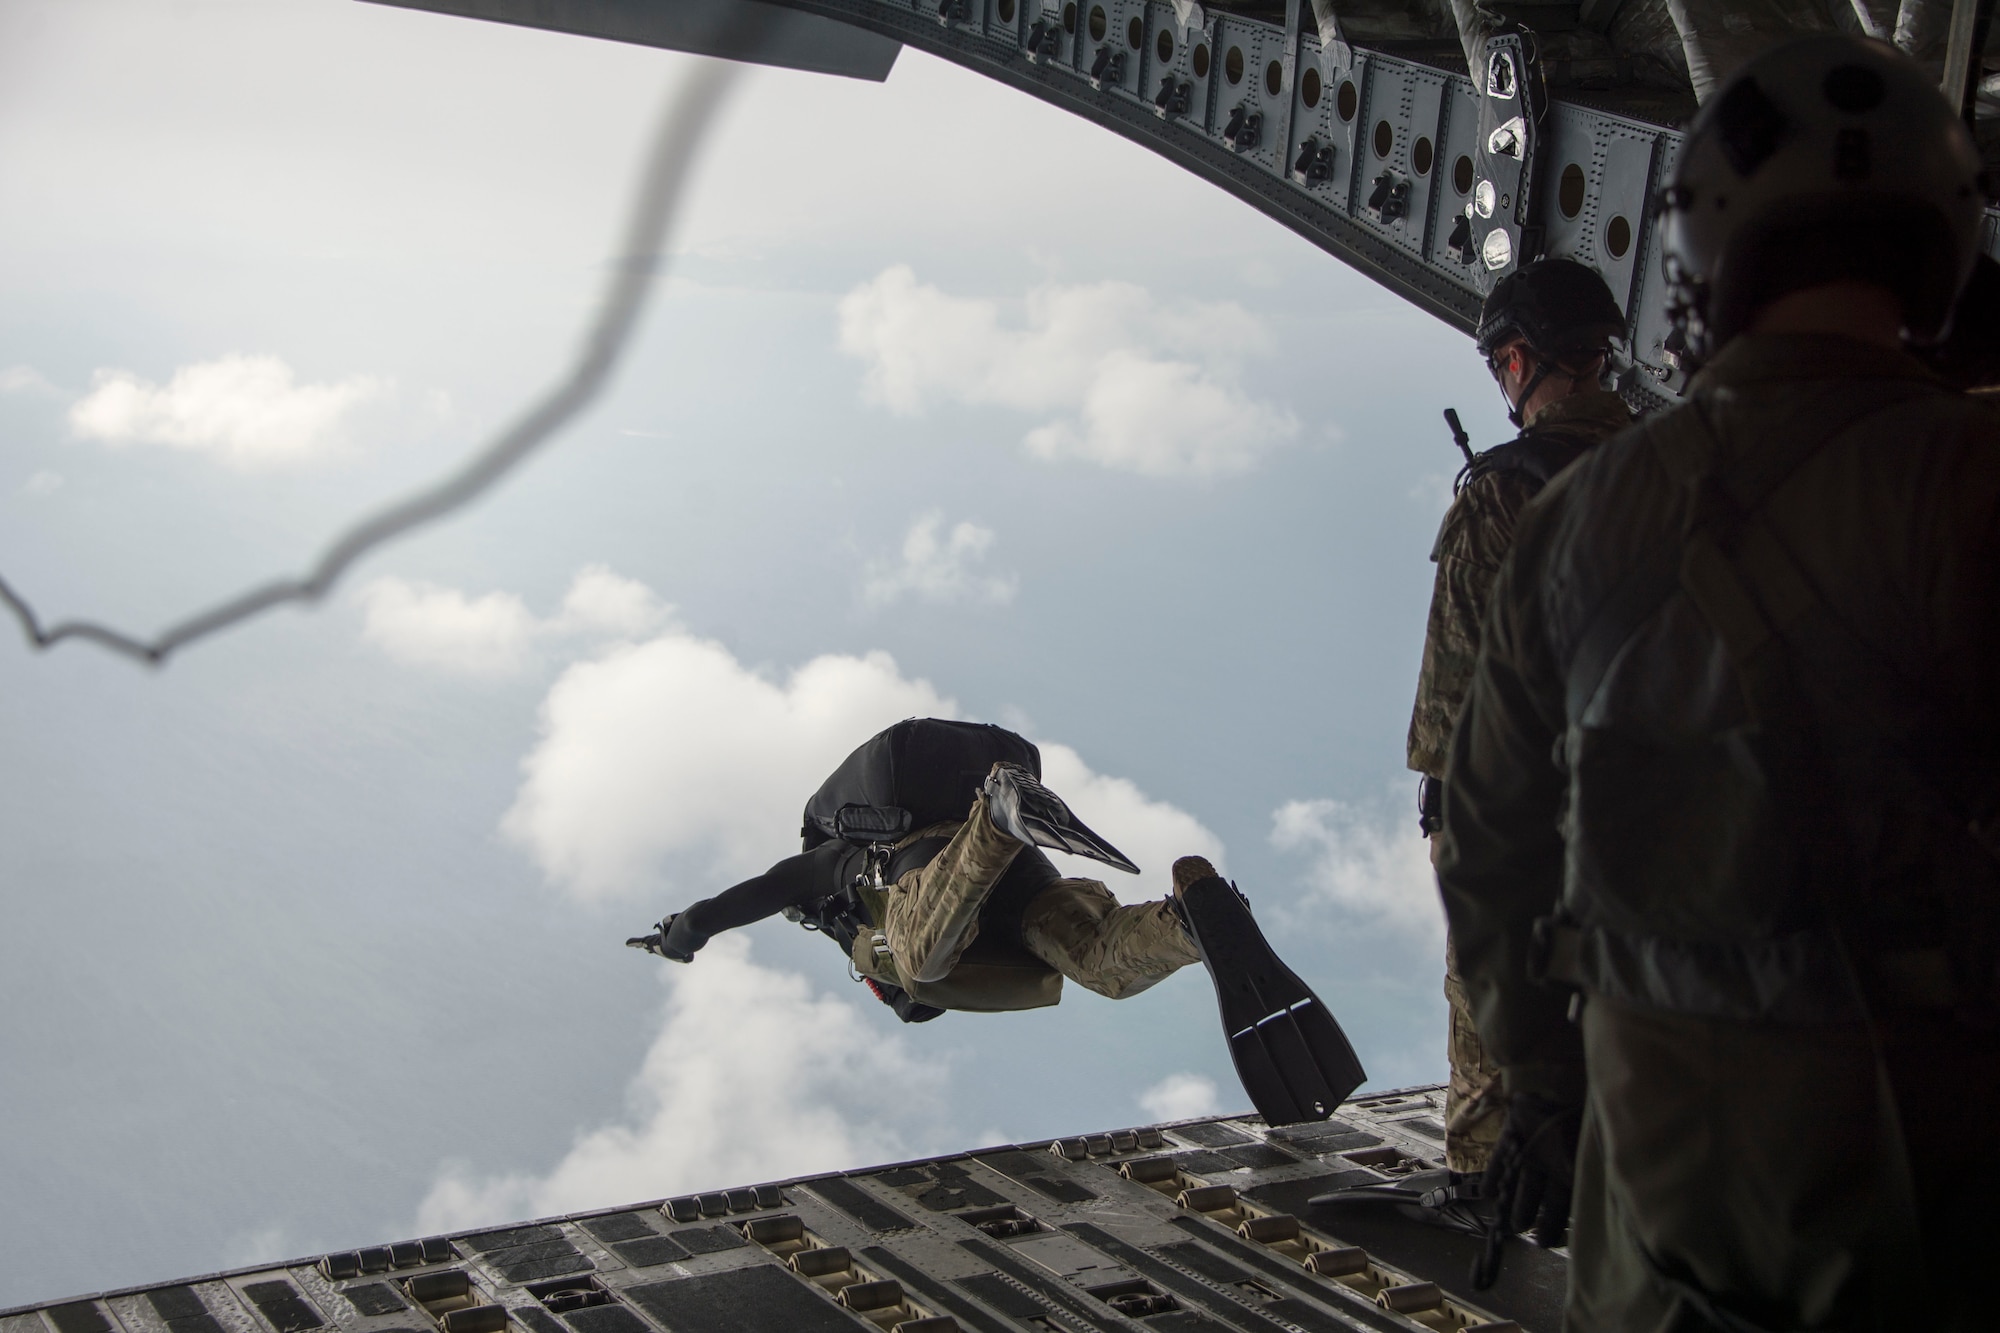 Master Sgt. Christopher Harding, a 212th Rescue Squadron pararescueman, performs a military free fall from a C-17 Globemaster from the 249th Airlift Squadron Oct. 31, 2015, near the coast of White Beach Naval Base, Japan. The aircraft airdropped an Alaska Air National Guard guardian angel rescue team along with two rescue crafts to conduct a long range search and rescue exercise. The C-17 also delivered an HH-60 Pave Hawk along with a maintenance crew to extract the team if needed. (Courtesy photo)